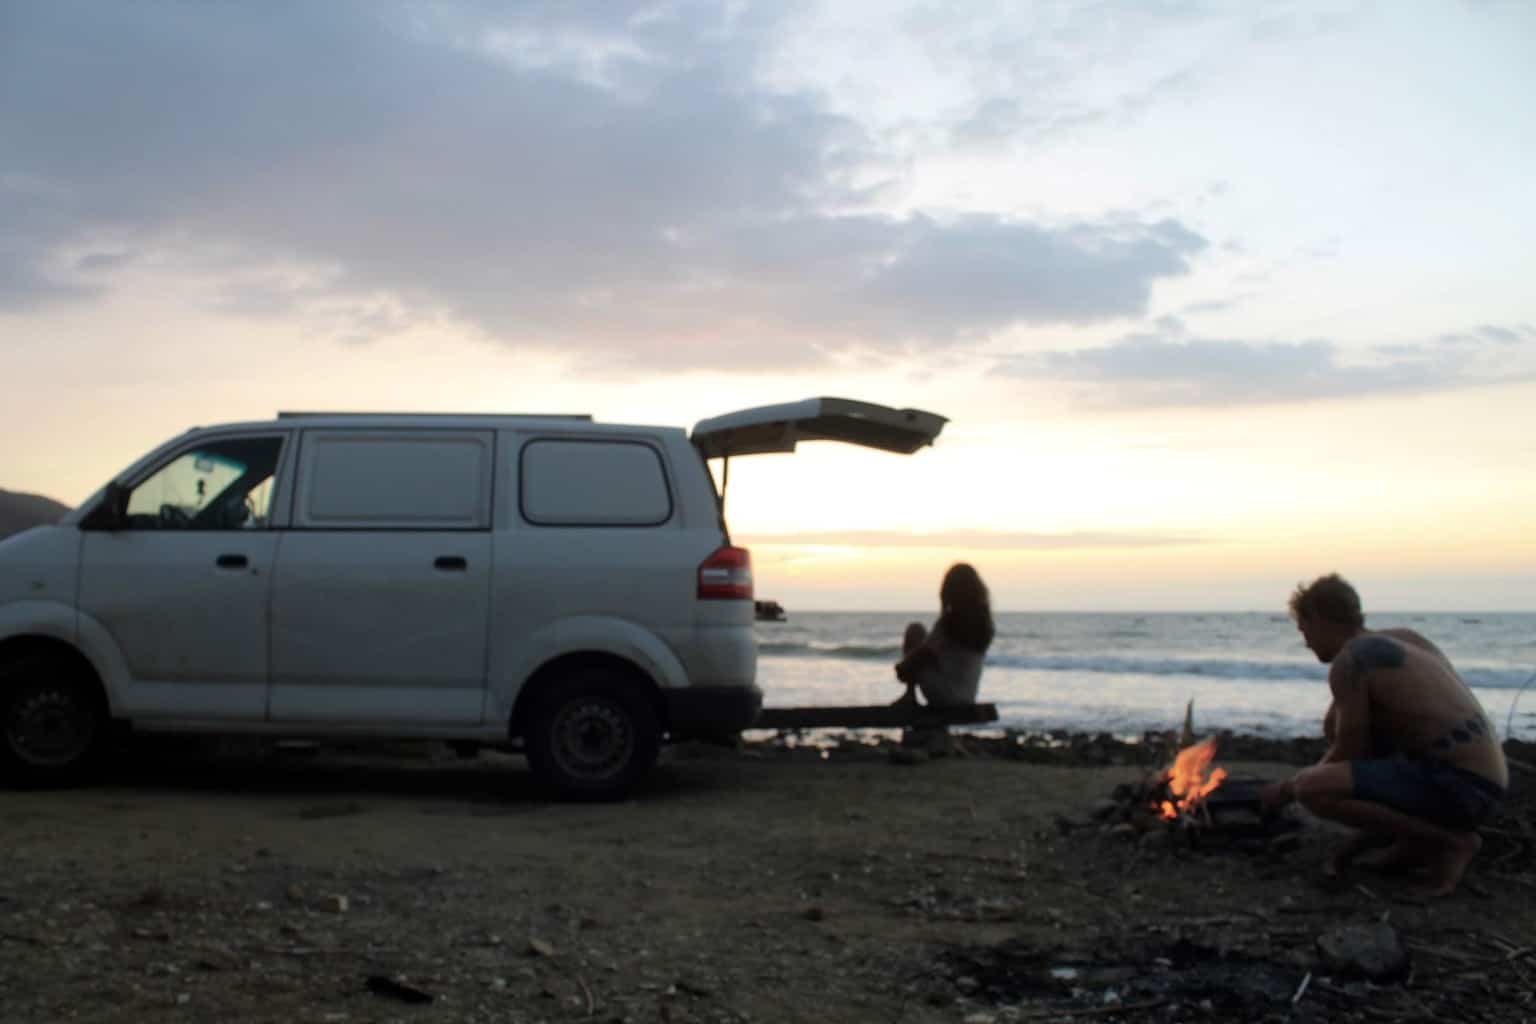 How to start van life and camp in epic spots like this van camped on a beach with a fire.